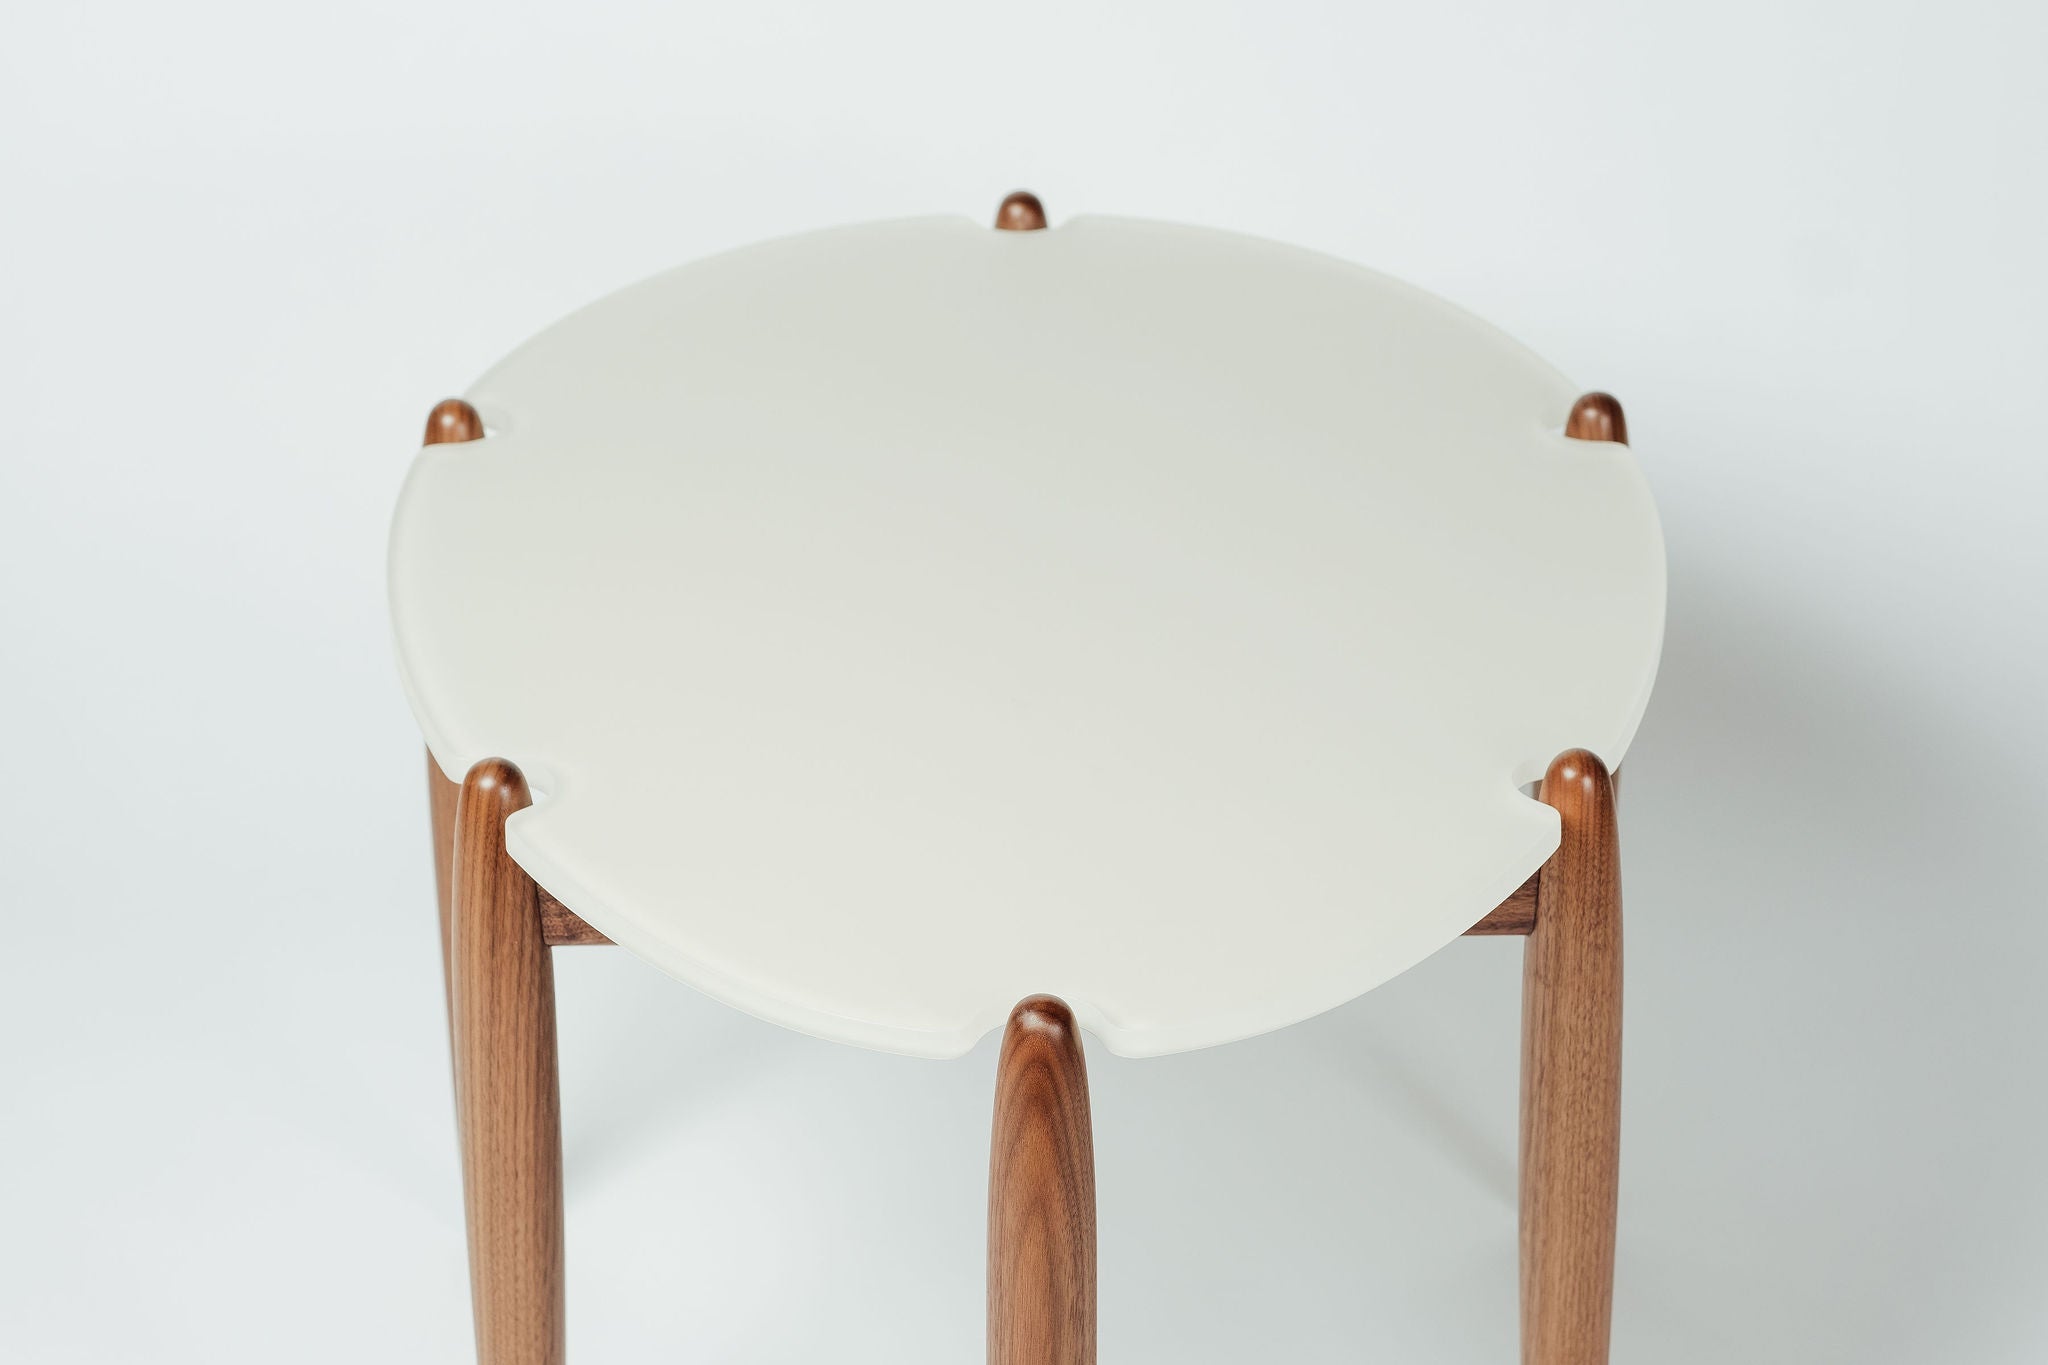 Ray midcentury modern walnut wood acrylic accent table handcrafted by Hunt & Noyer in Michigan